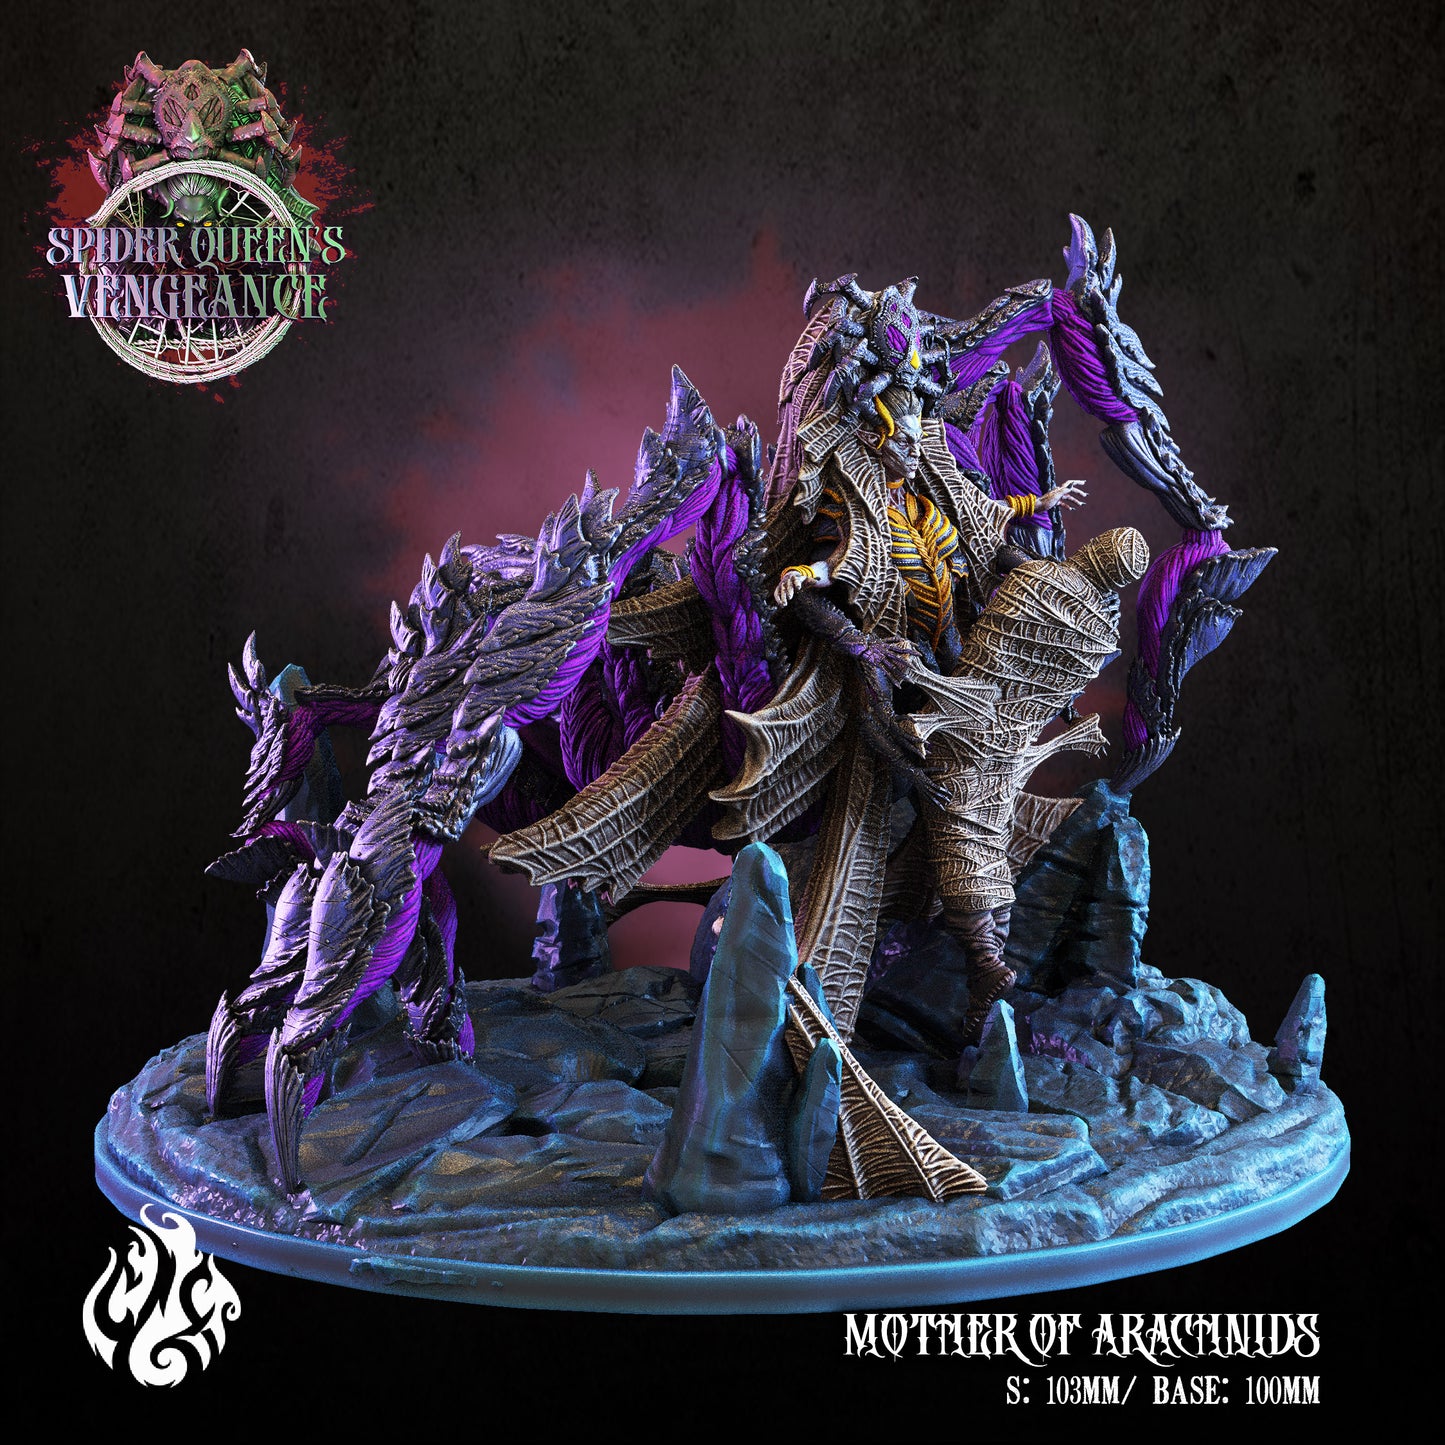 Mother of Arachnids the Spider Queen Spider Queen's Vengeance Series from Crippled God Foundry - Table-top gaming mini and collectable for painting.